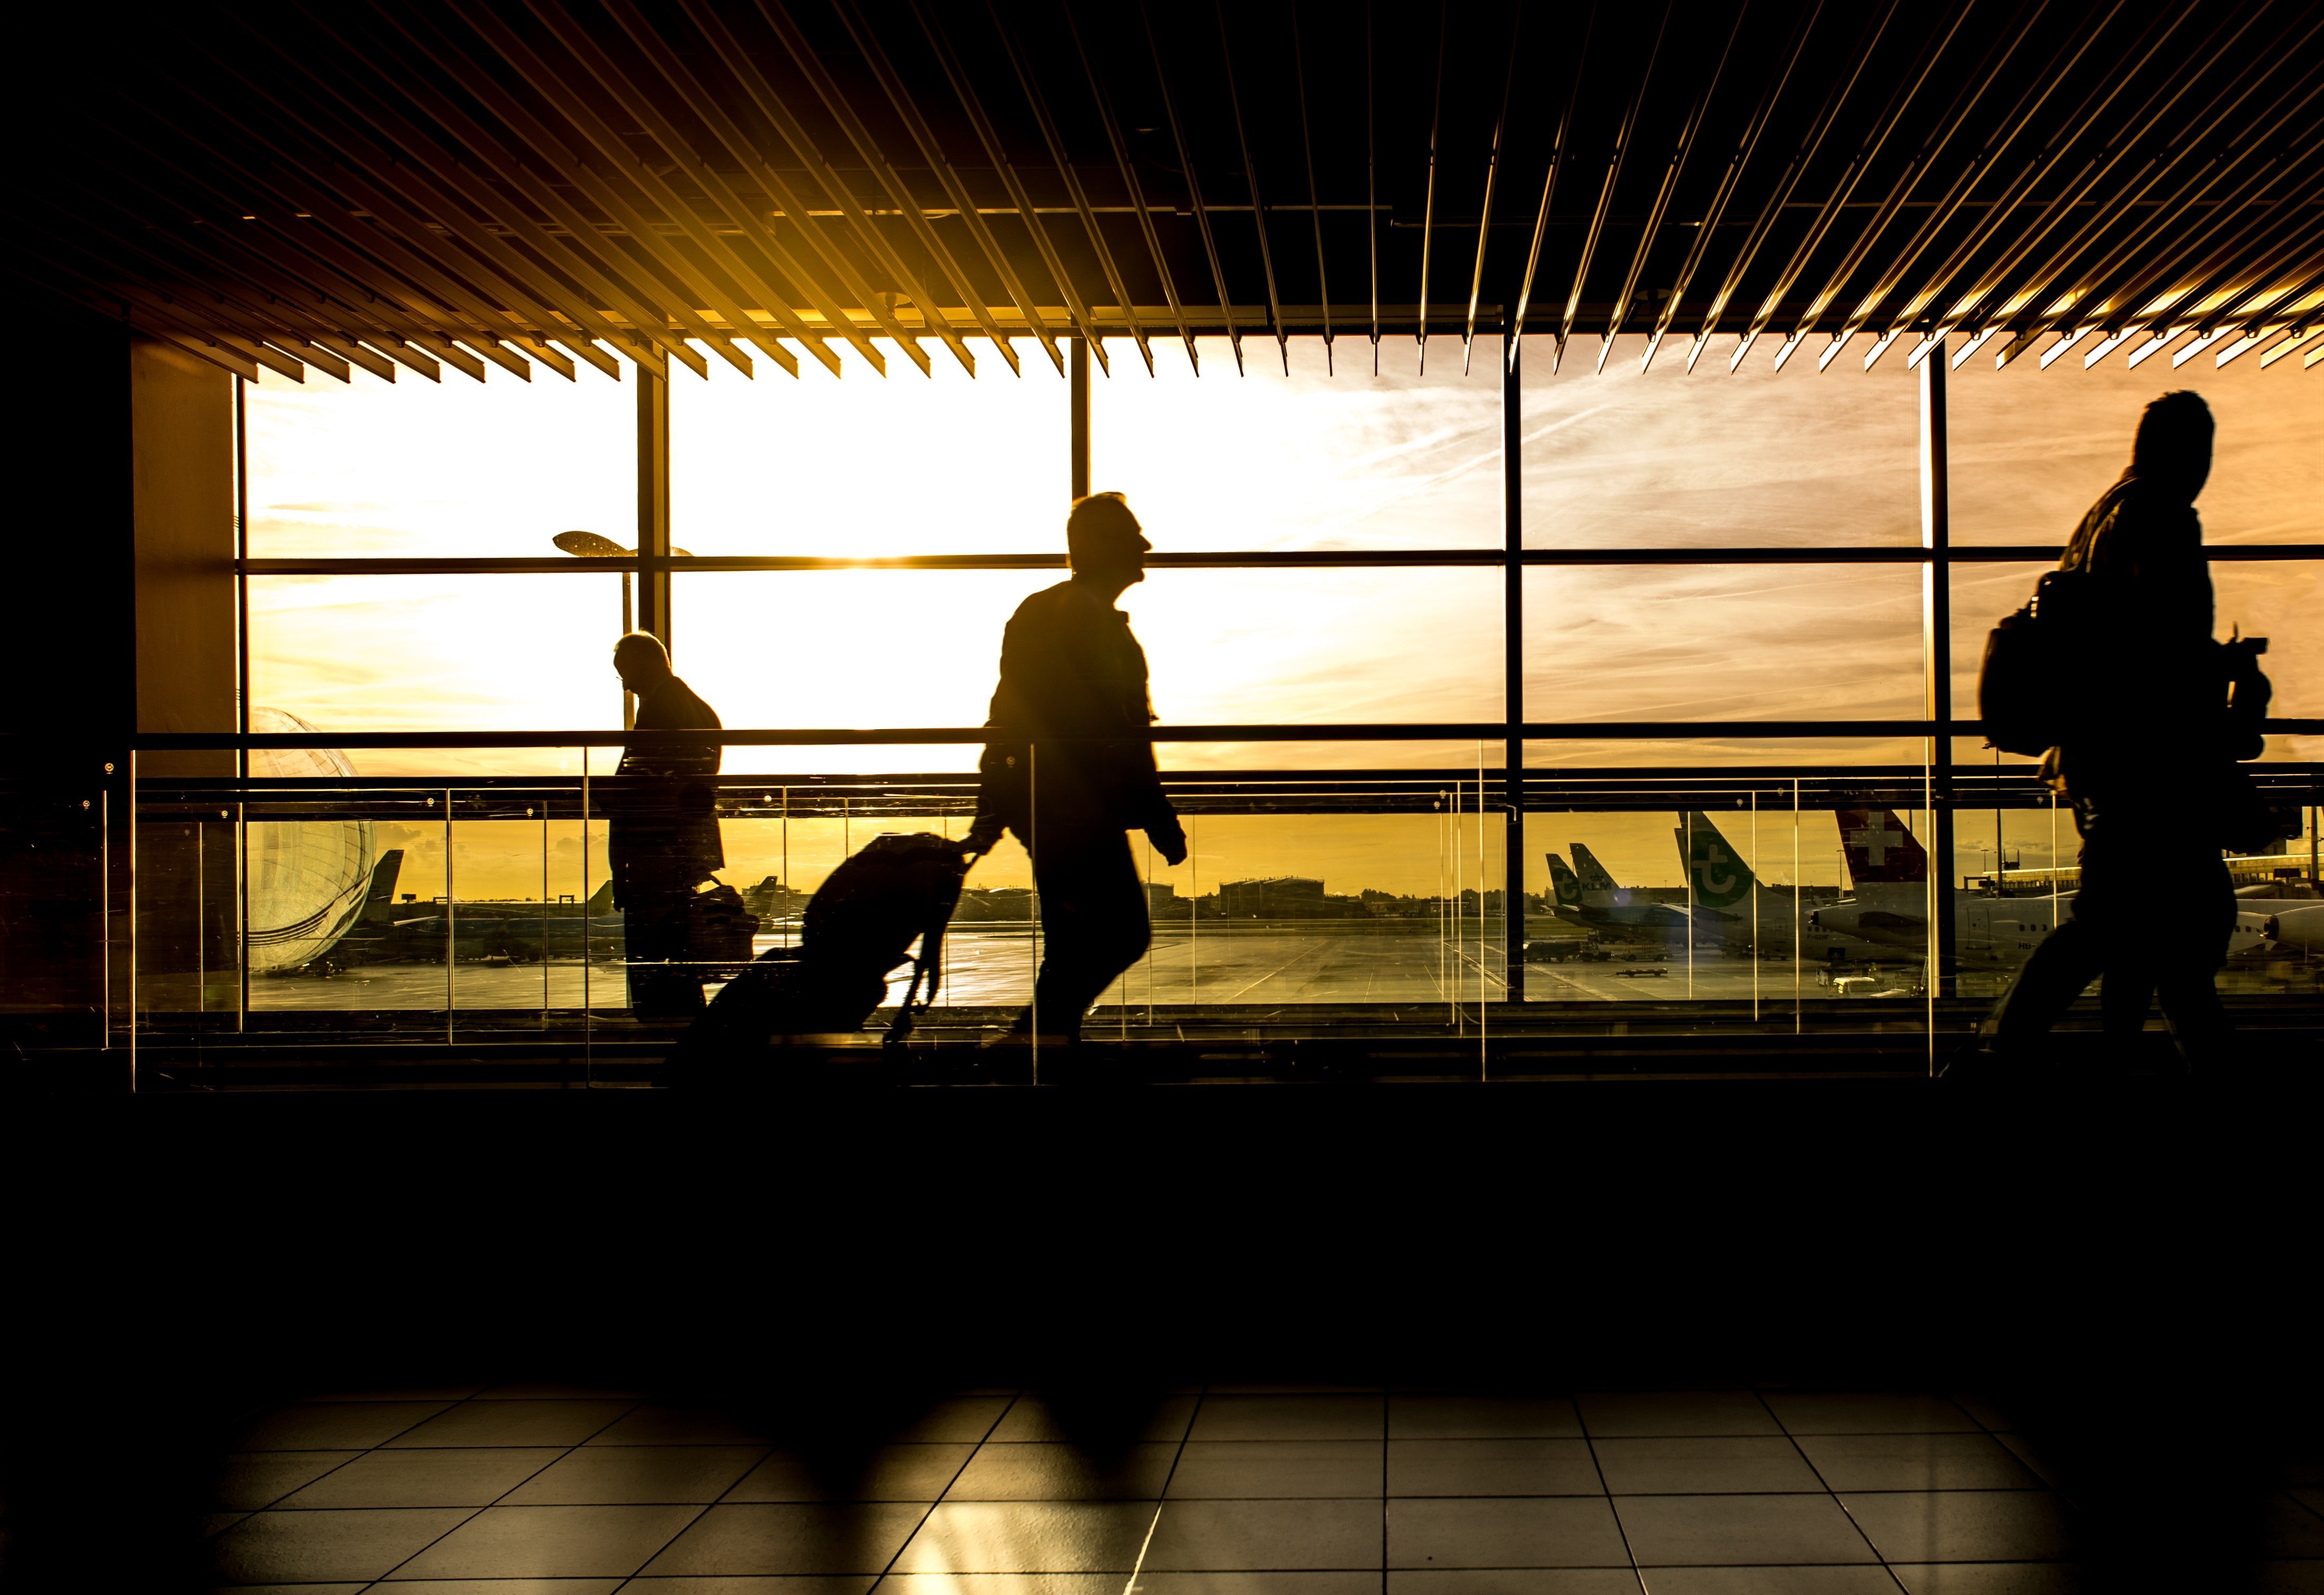 People moving around in an airport. | Source: Pexels